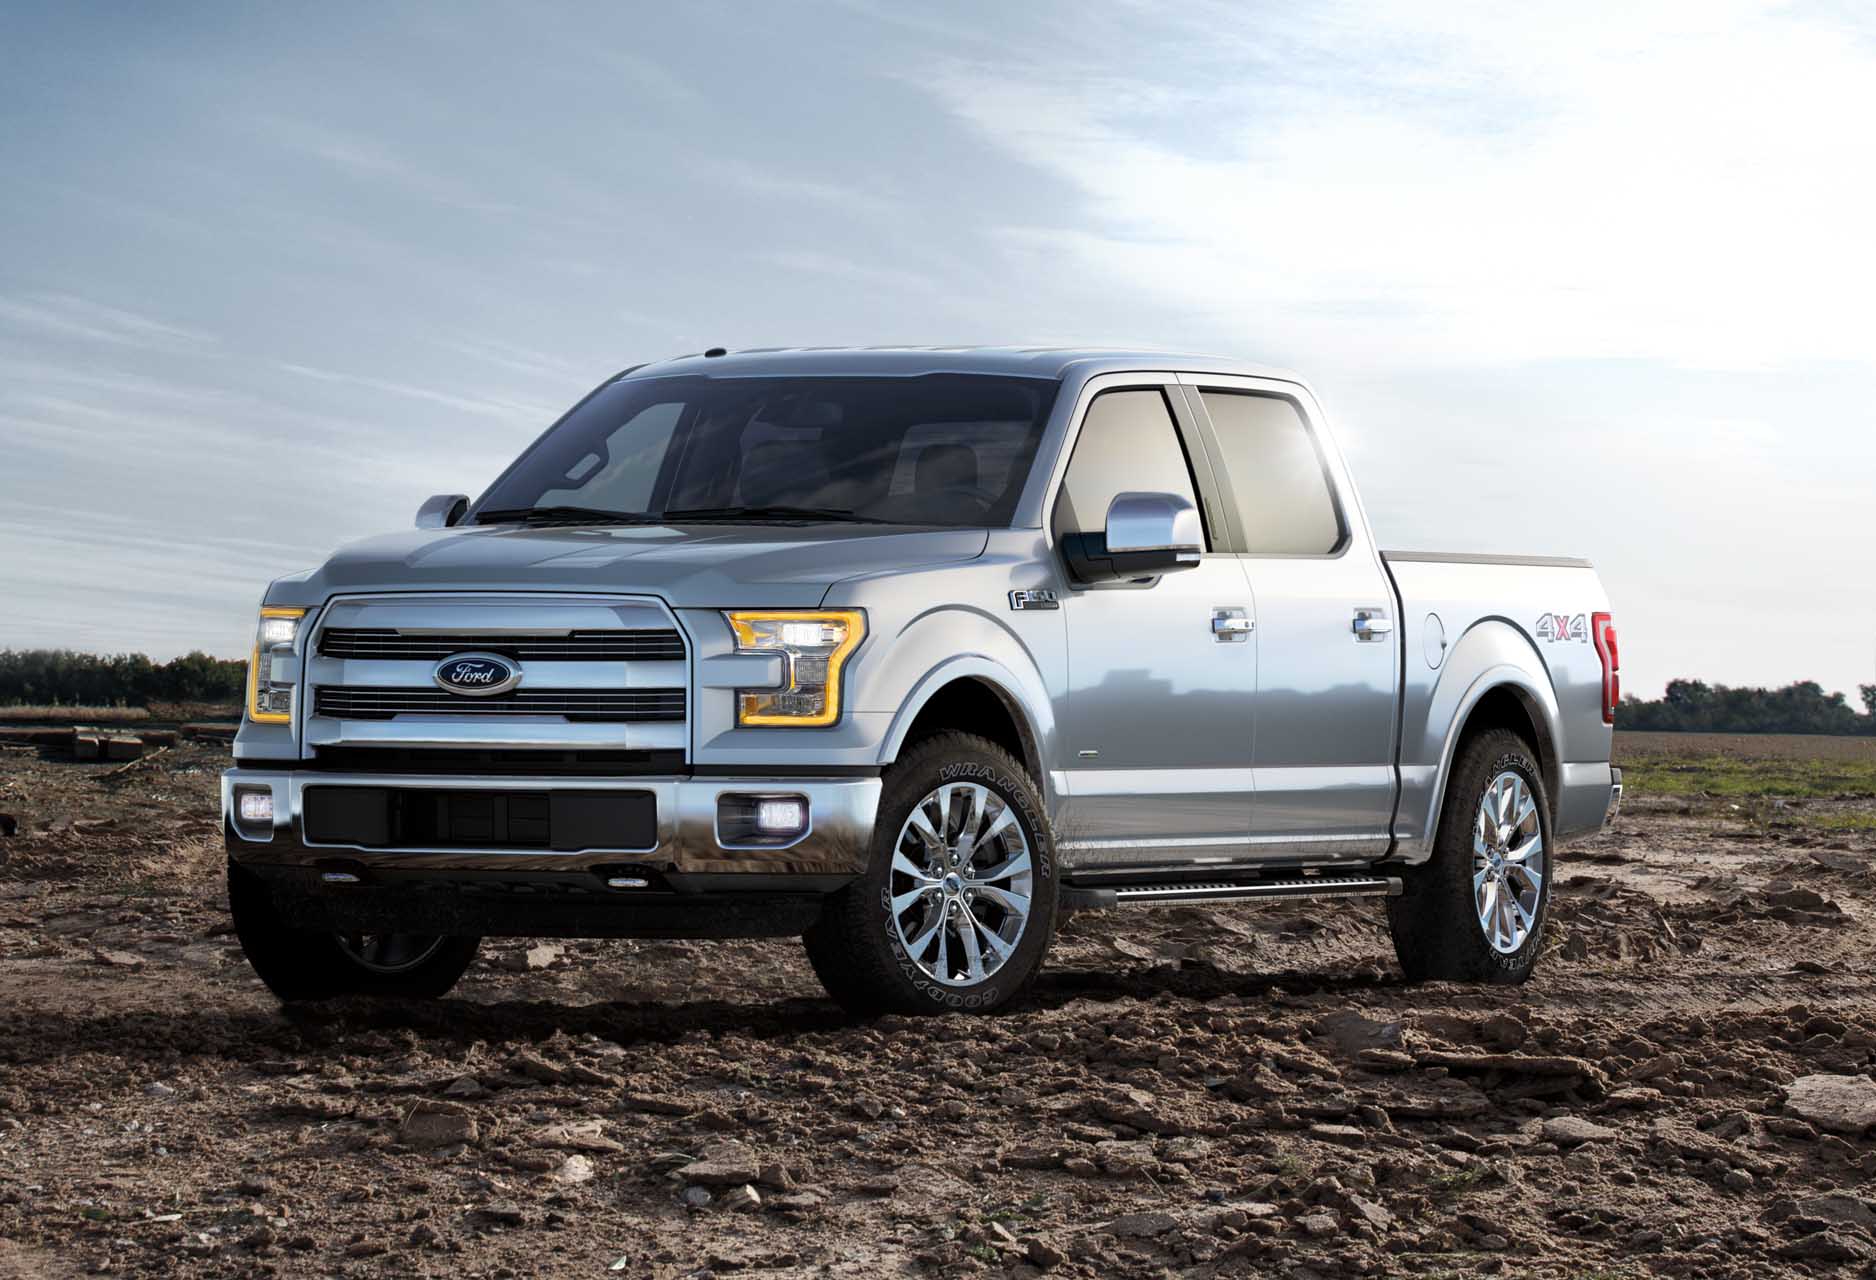 The Ford F-150 pickup truck over the years: A brief history